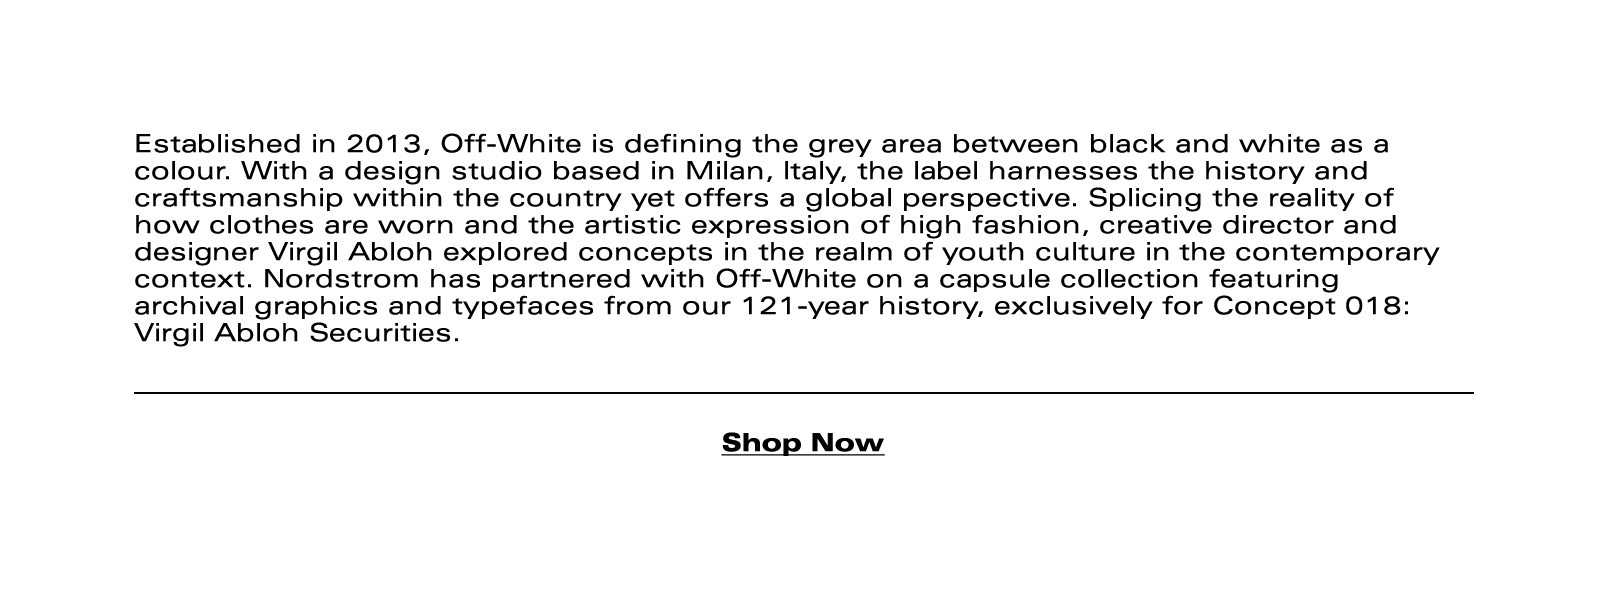 Established in 2013, Off-White is defining the grey area between black and white as a colour. With a design studio based in Milan, Italy, the label harnesses the history and craftsmanship within the country yet offers a global perspective. Splicing the reality of how clothes are worn and the artistic expression of high fashion, creative director and designer Virgil Abloh explored concepts in the realm of youth culture in the contemporary context. Nordstrom has partnered with Off-White on a capsule collection featuring archival graphics and typefaces from our 121-year history, exclusively for Concept 018: Virgil Abloh Securities.